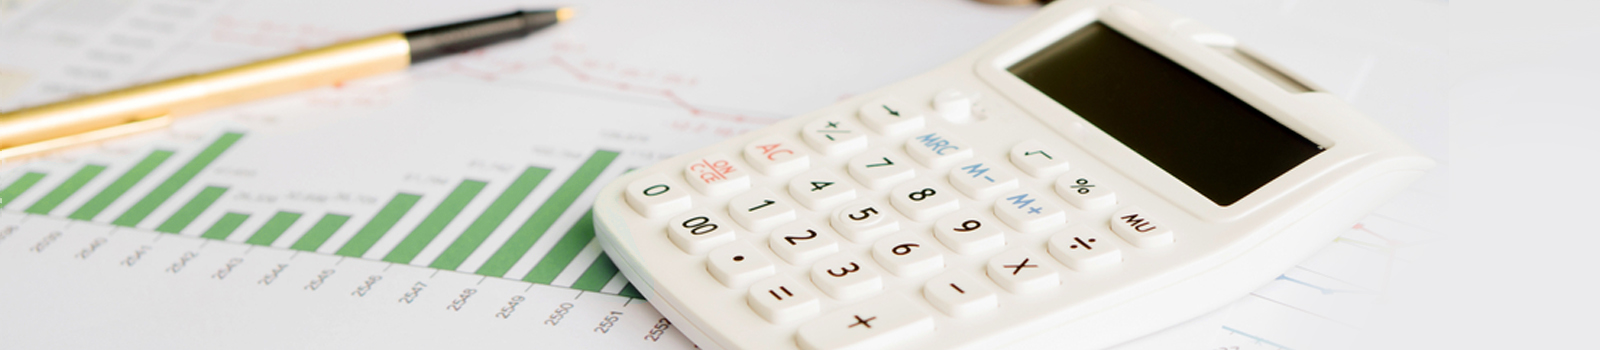 Calculator and pen on top of financial documents.